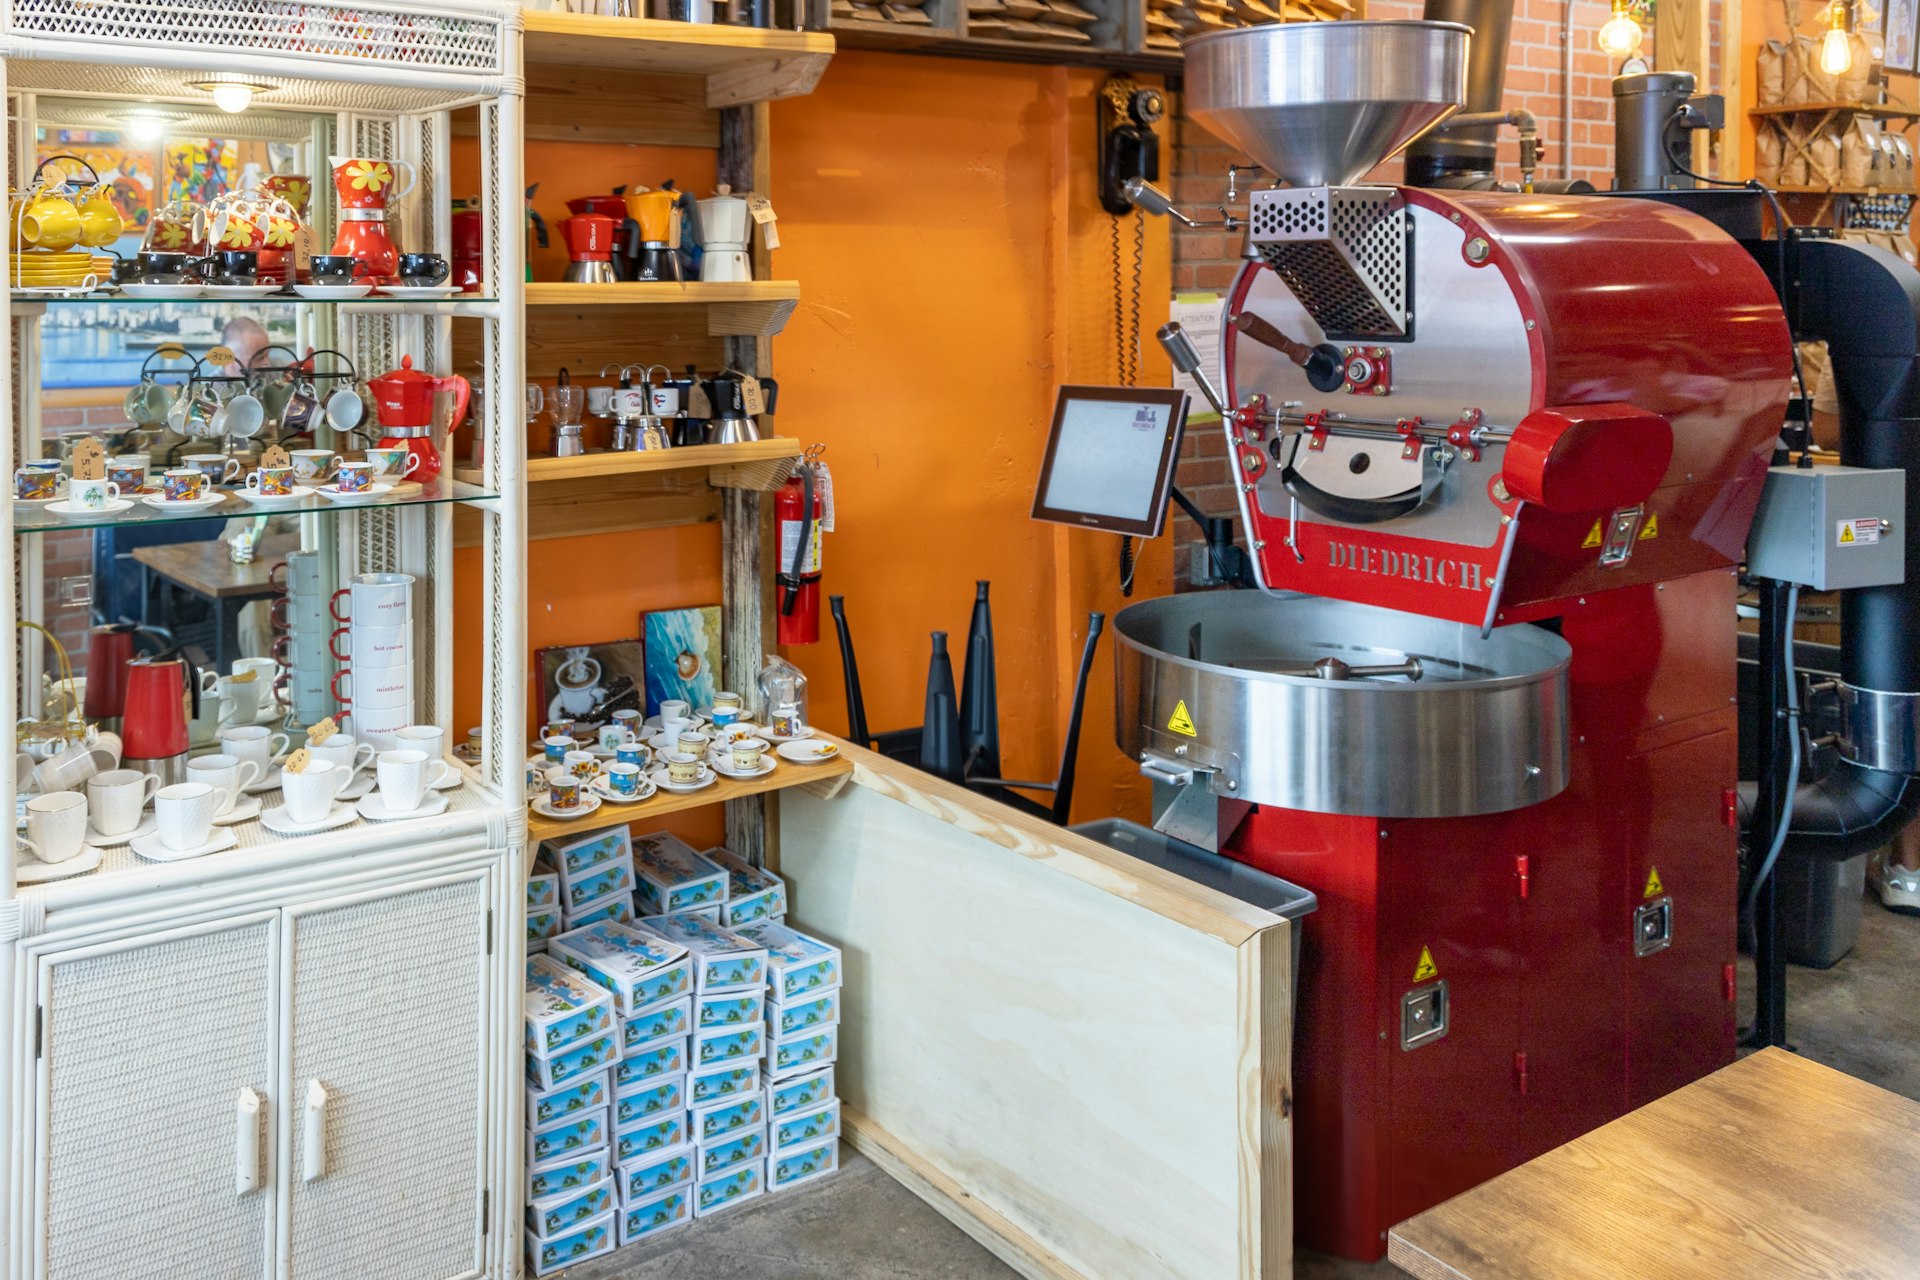 A display cabinet next to a large red coffee grinder is filled with espresso cups and coffee-themes ornaments for sale